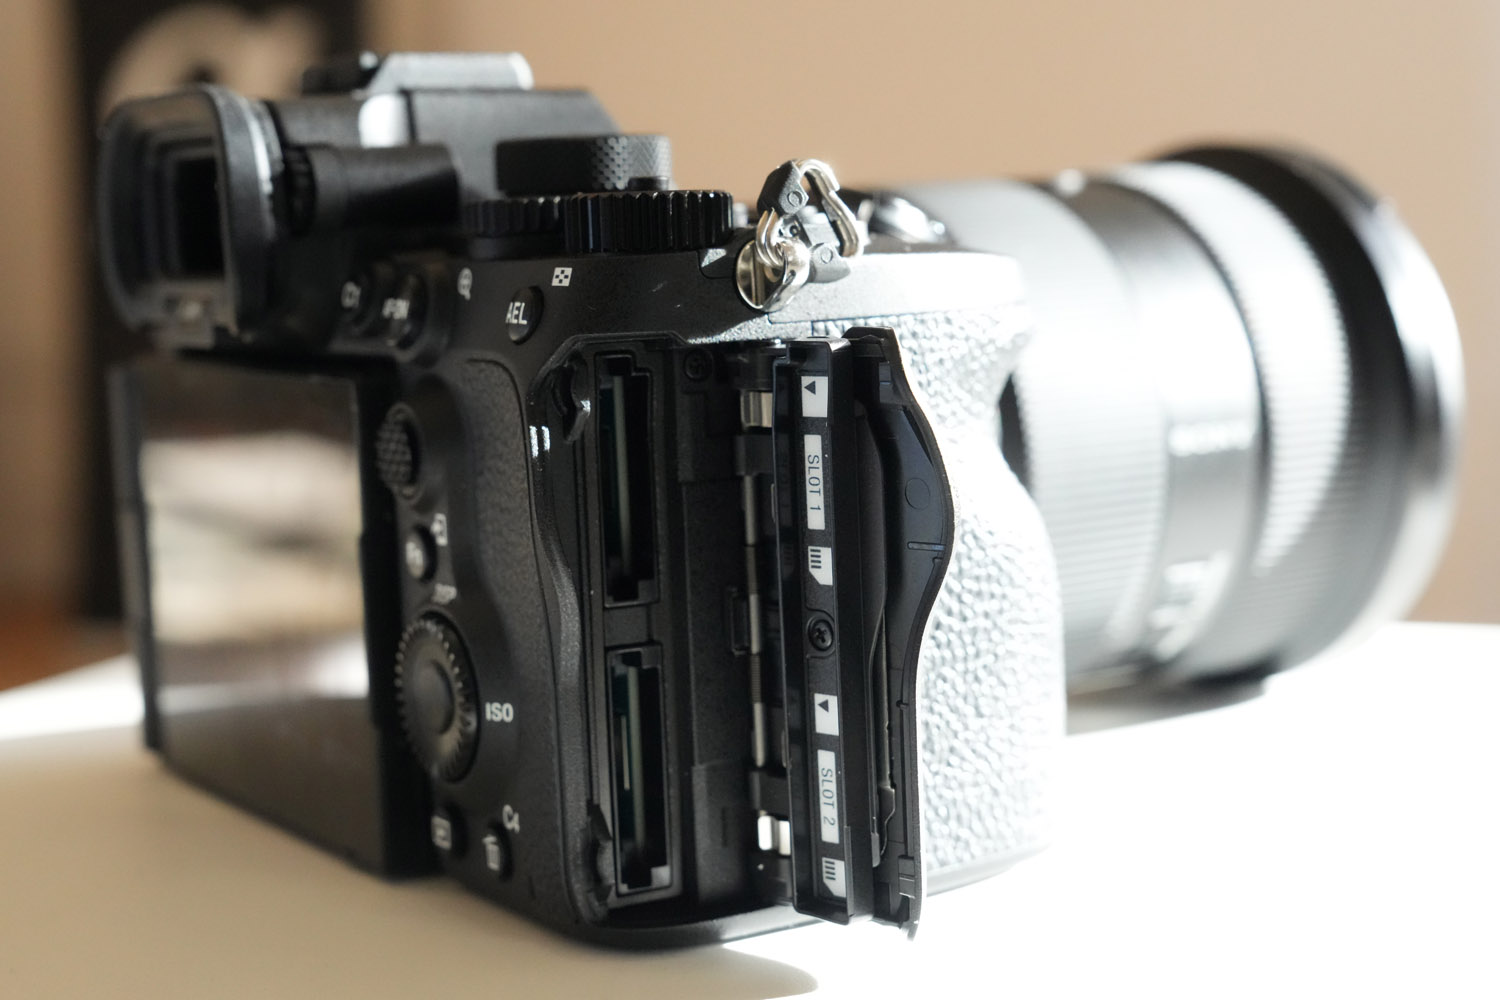 Sony a7R V hands-on review card slots